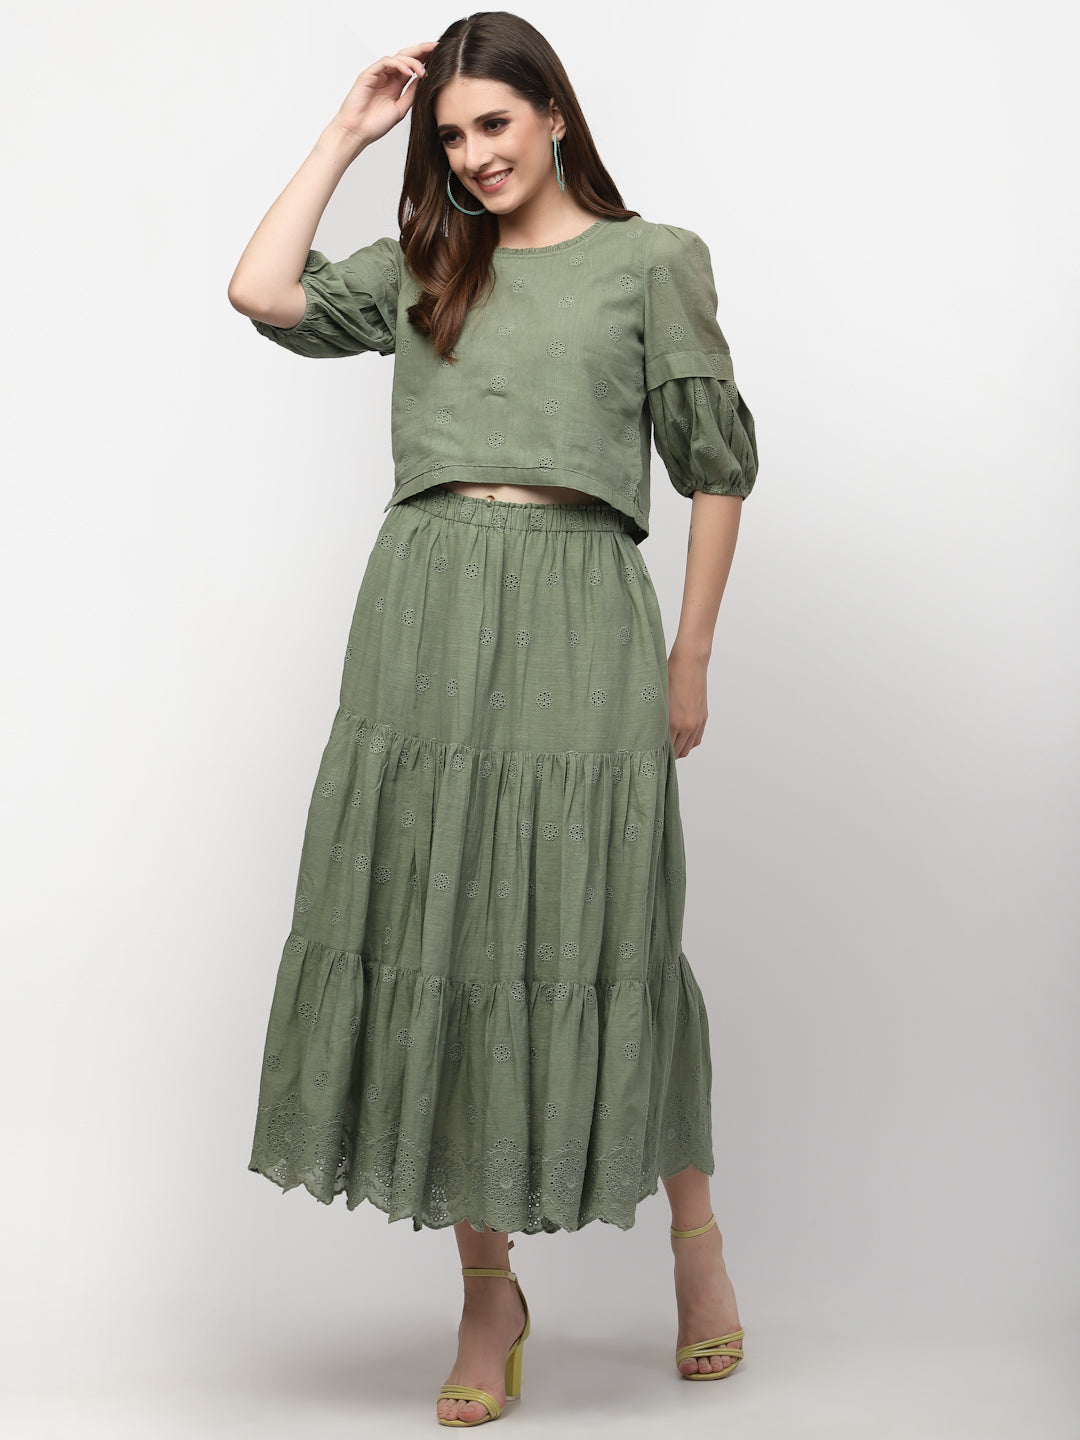 Terquois Self-Design Casual Skirt-Top with gathers and Pleates Coordinate Sets TERQUOIS   